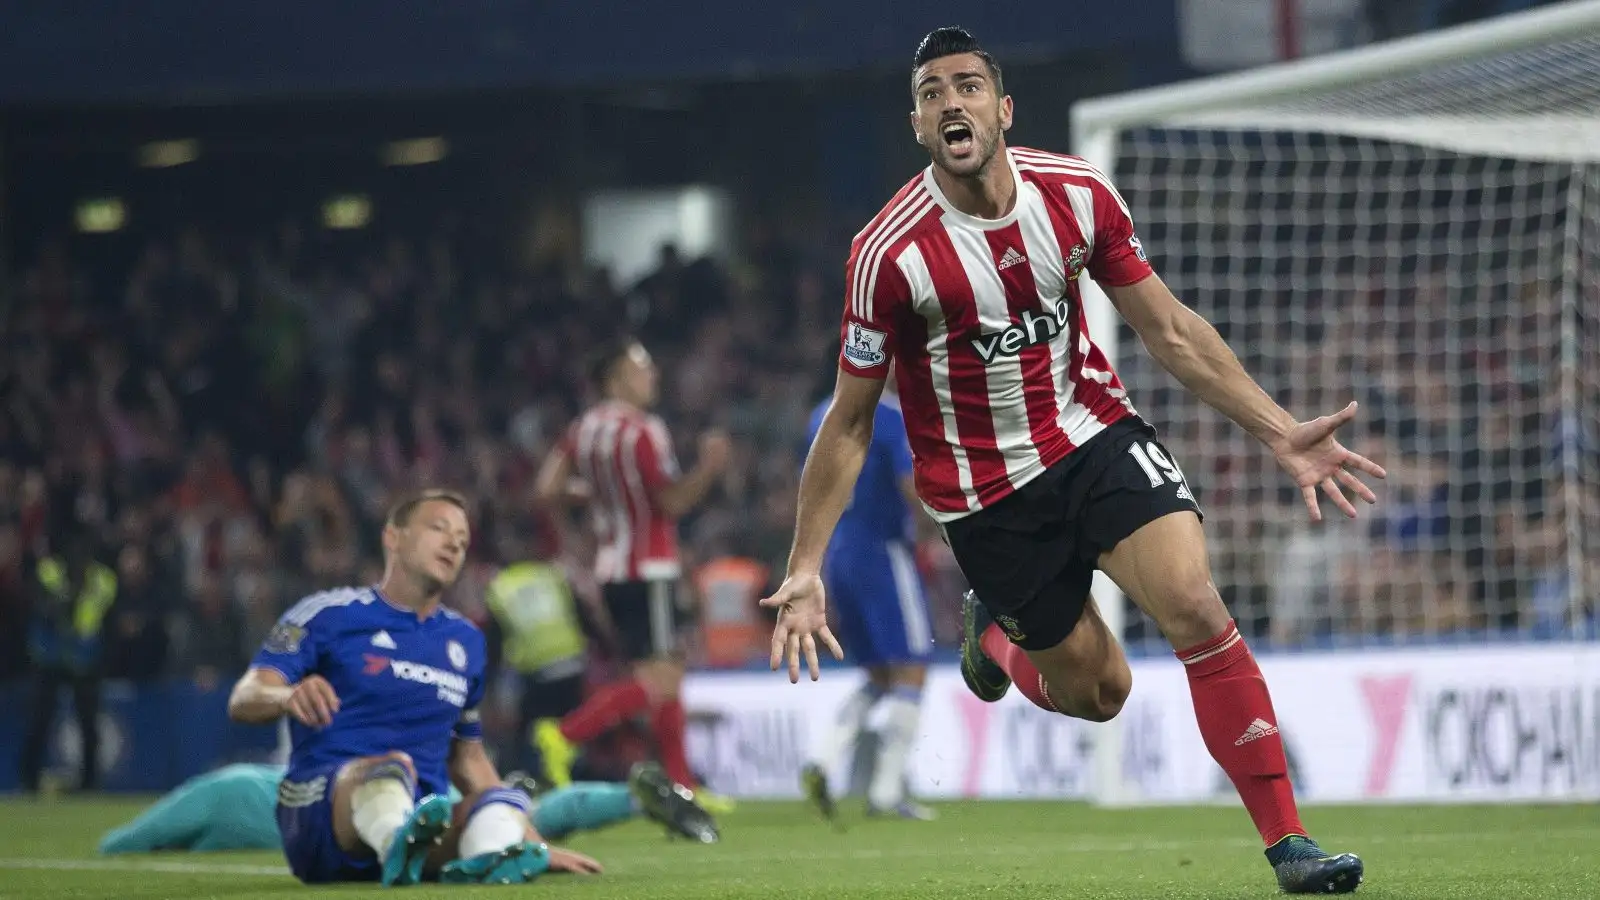 Remembering when Graziano Pelle put on the ultimate striker’s clinic at Stamford Bridge